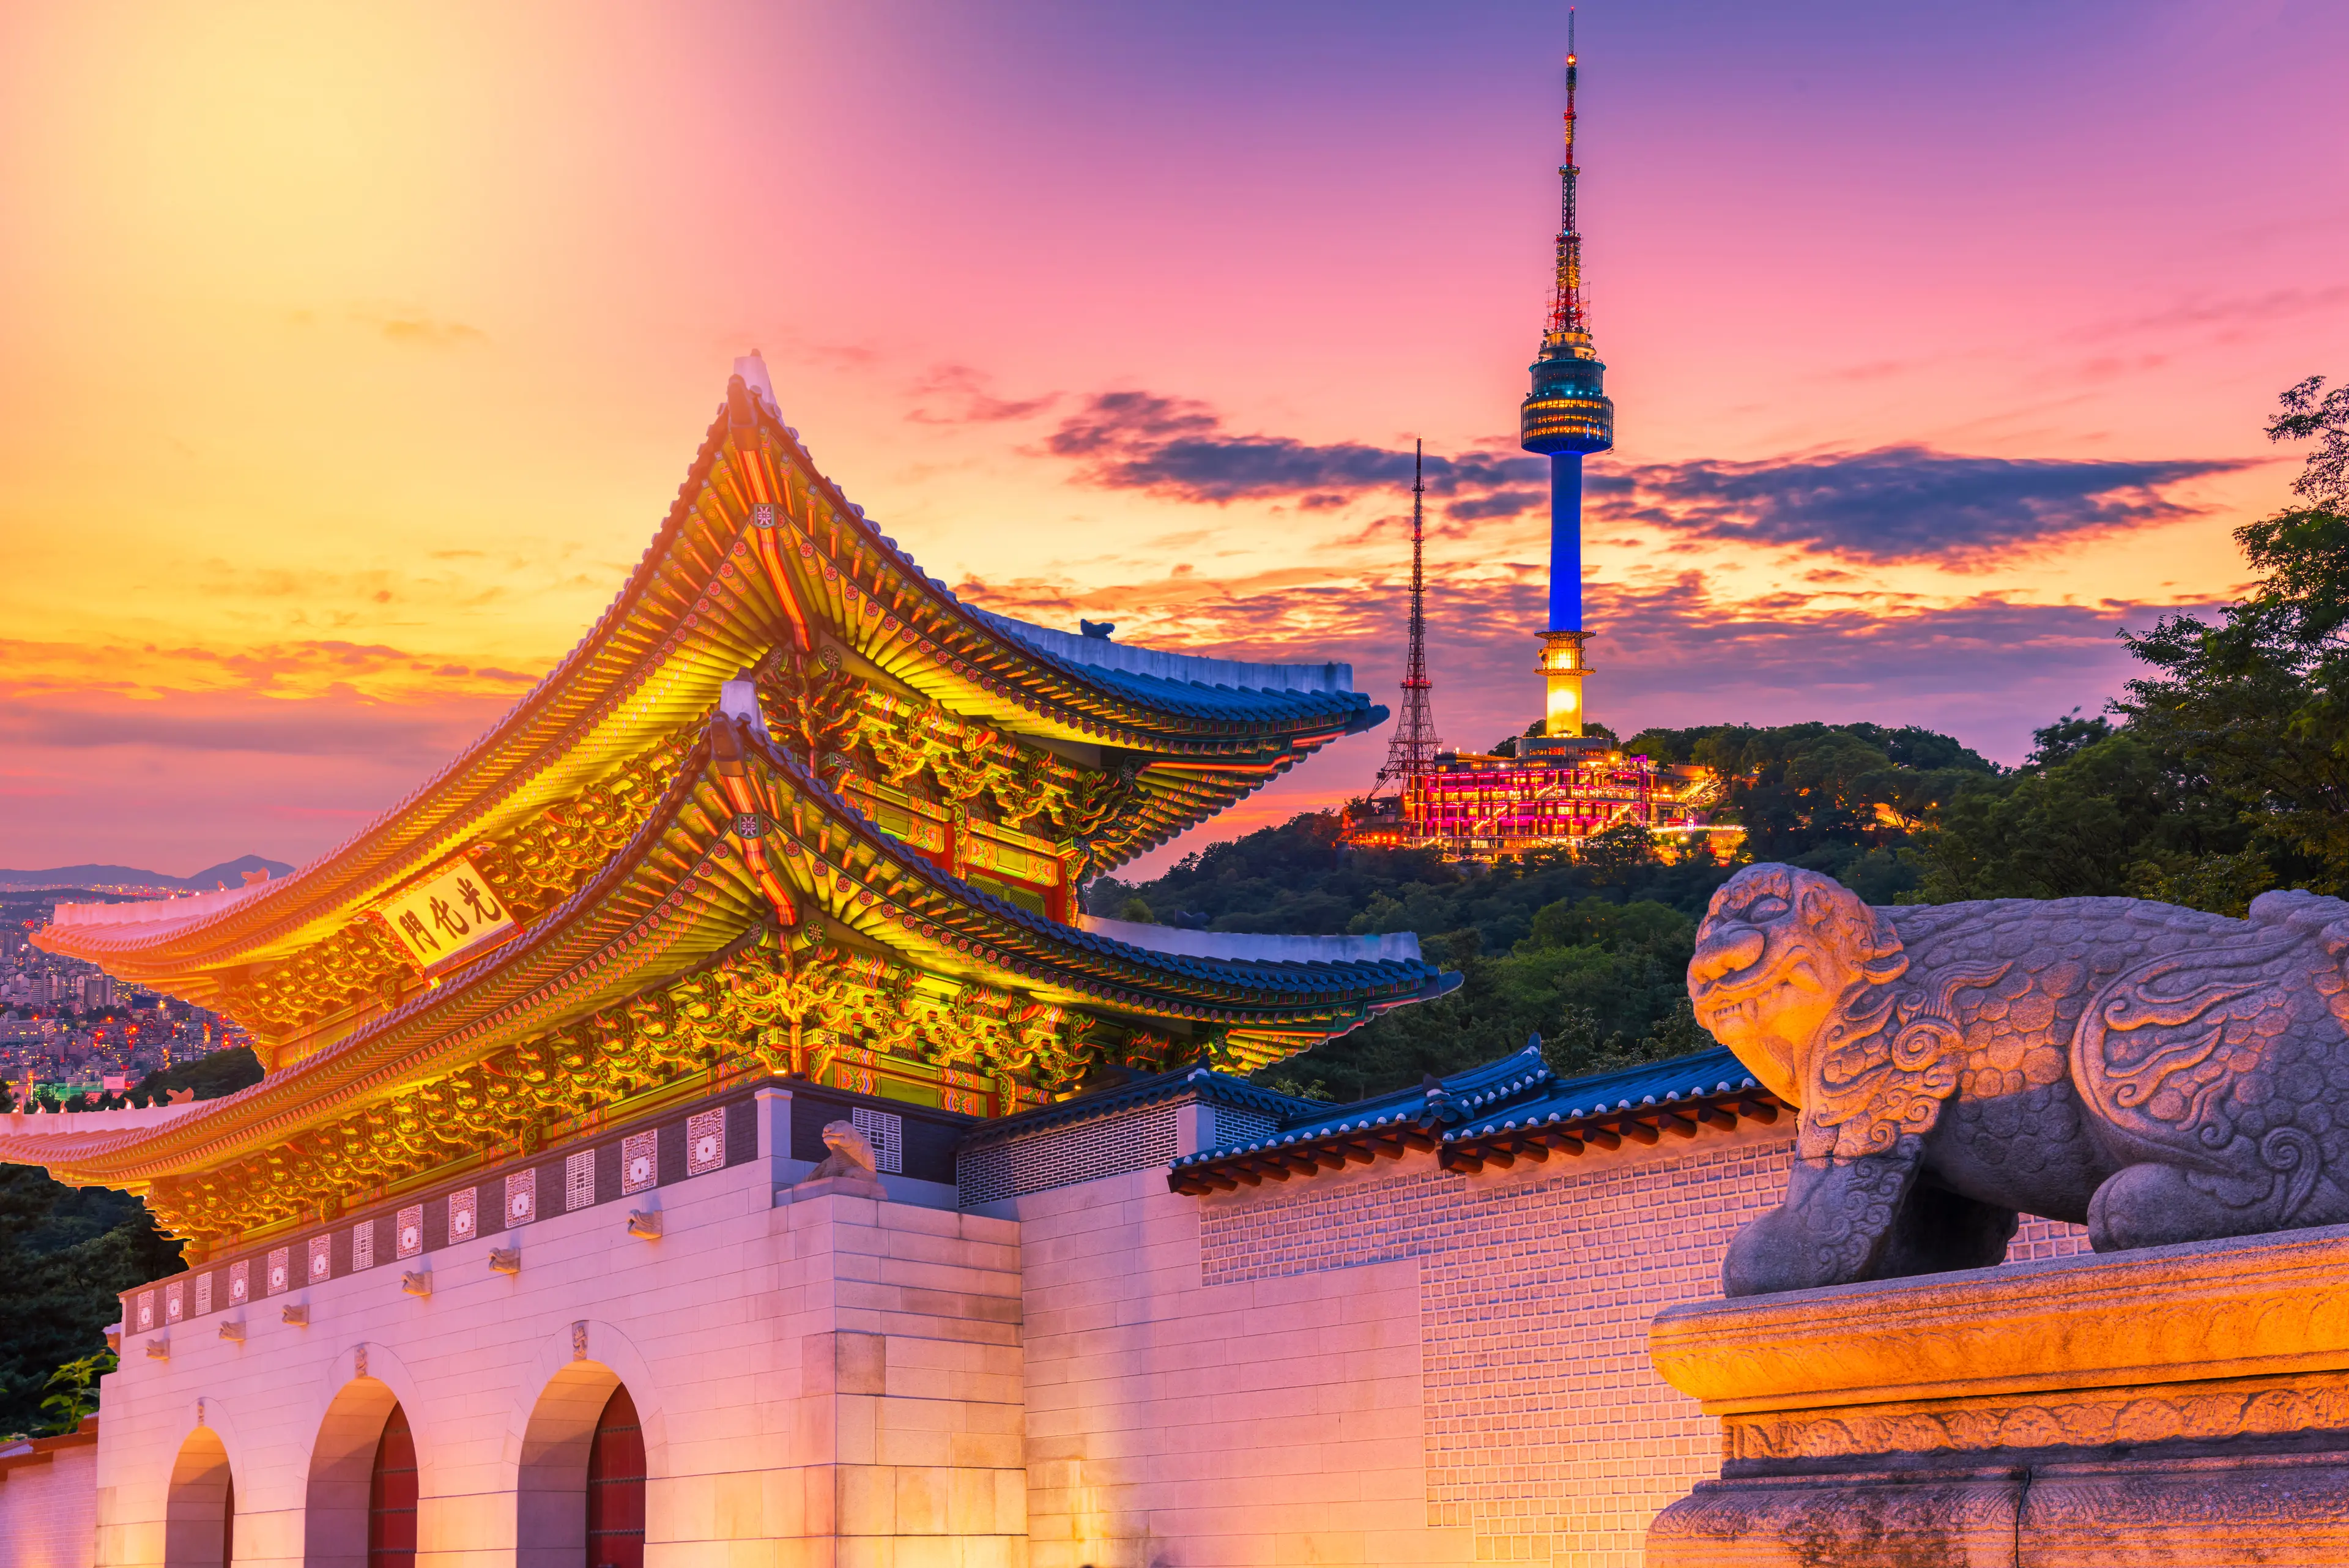 1-Day Adventure: Unexplored Outdoors & Thrills in Seoul, South Korea